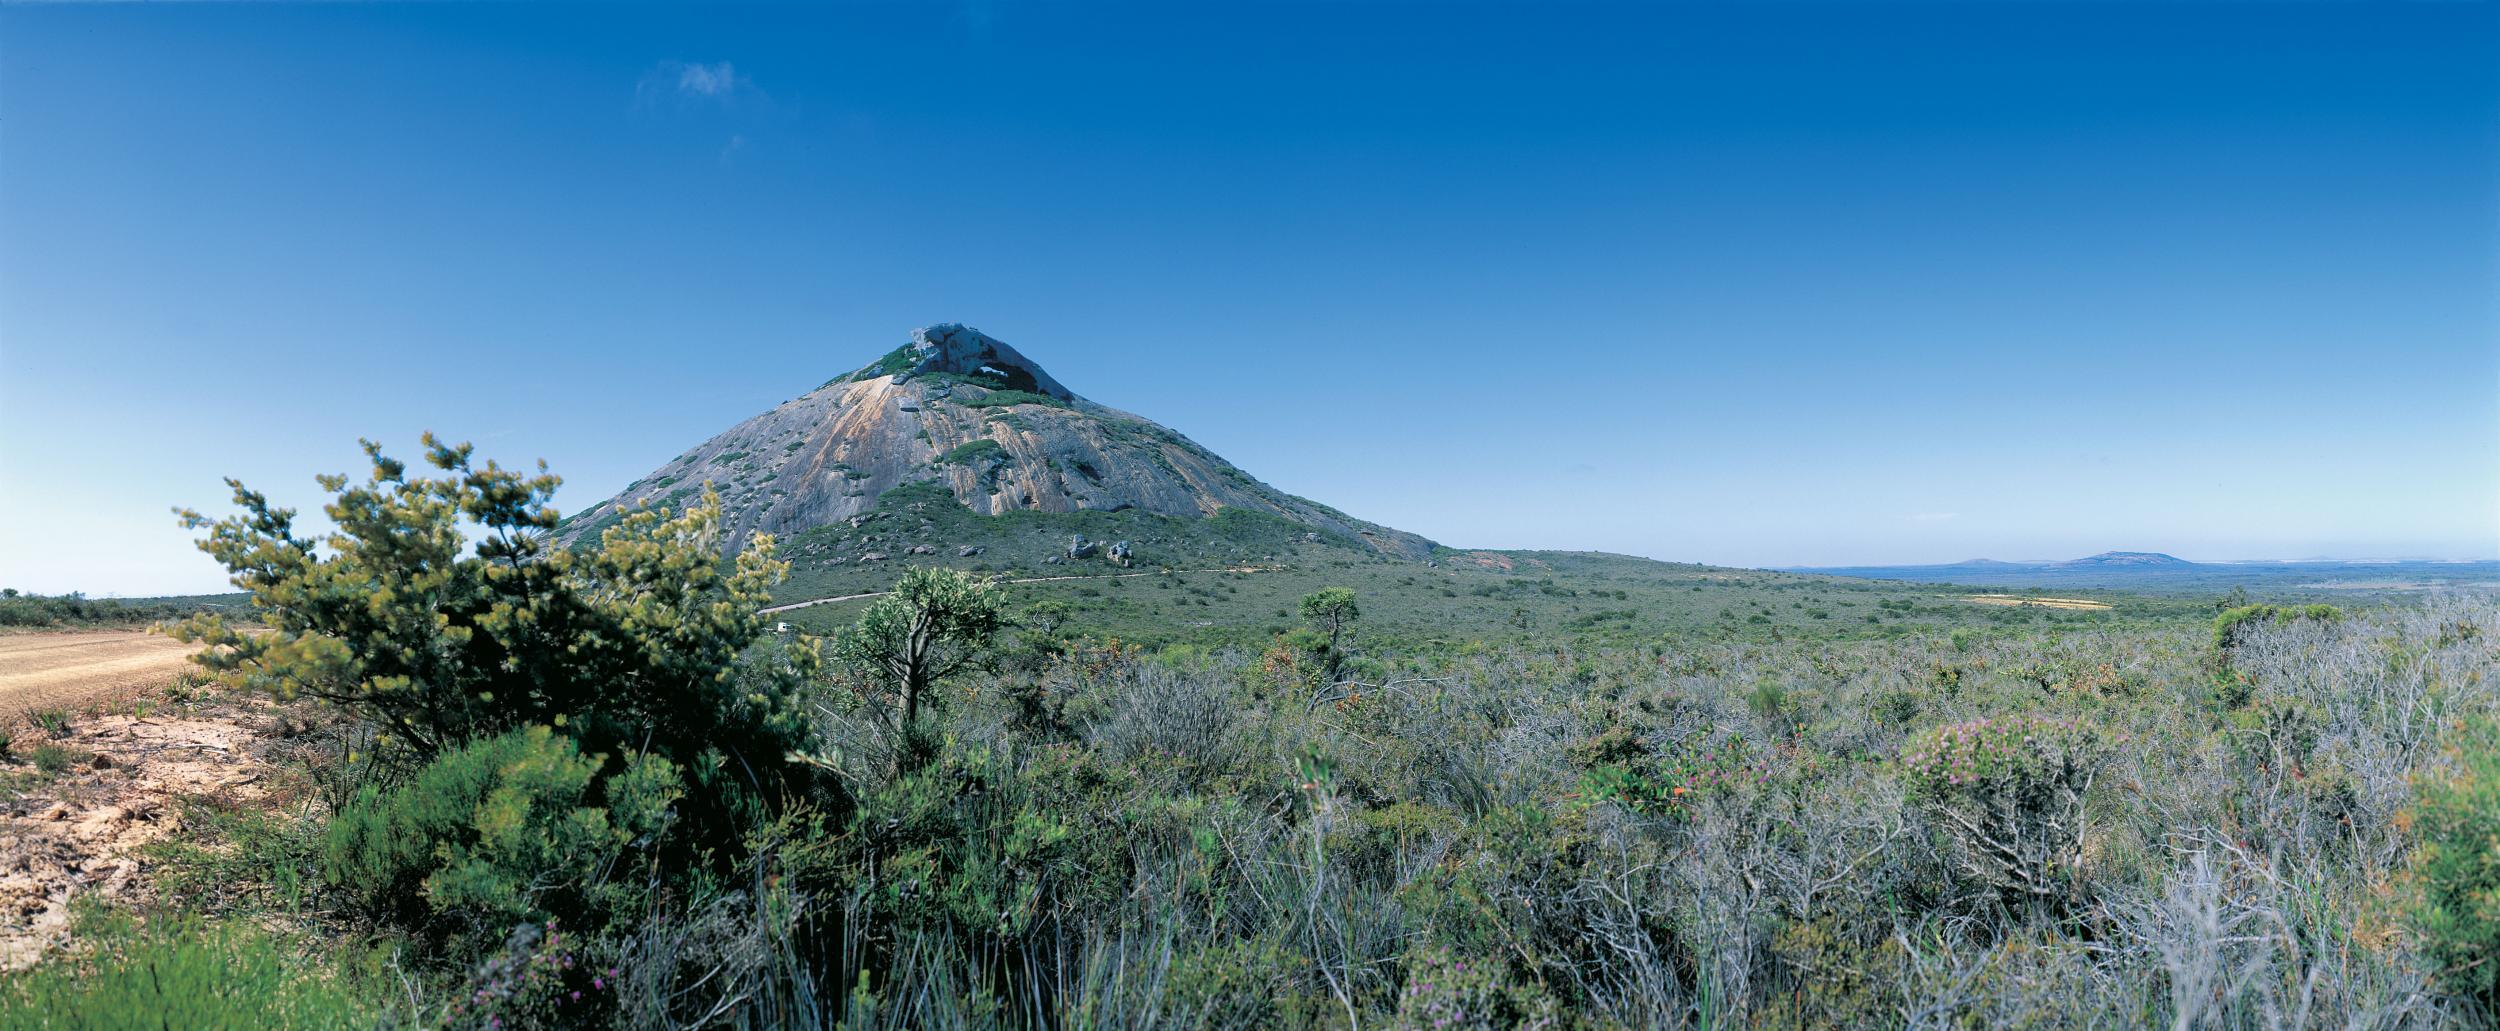 &#13;
The climb up Frenchman Peak in Cape Le Grand National Park is worth it for the spectacular views &#13;